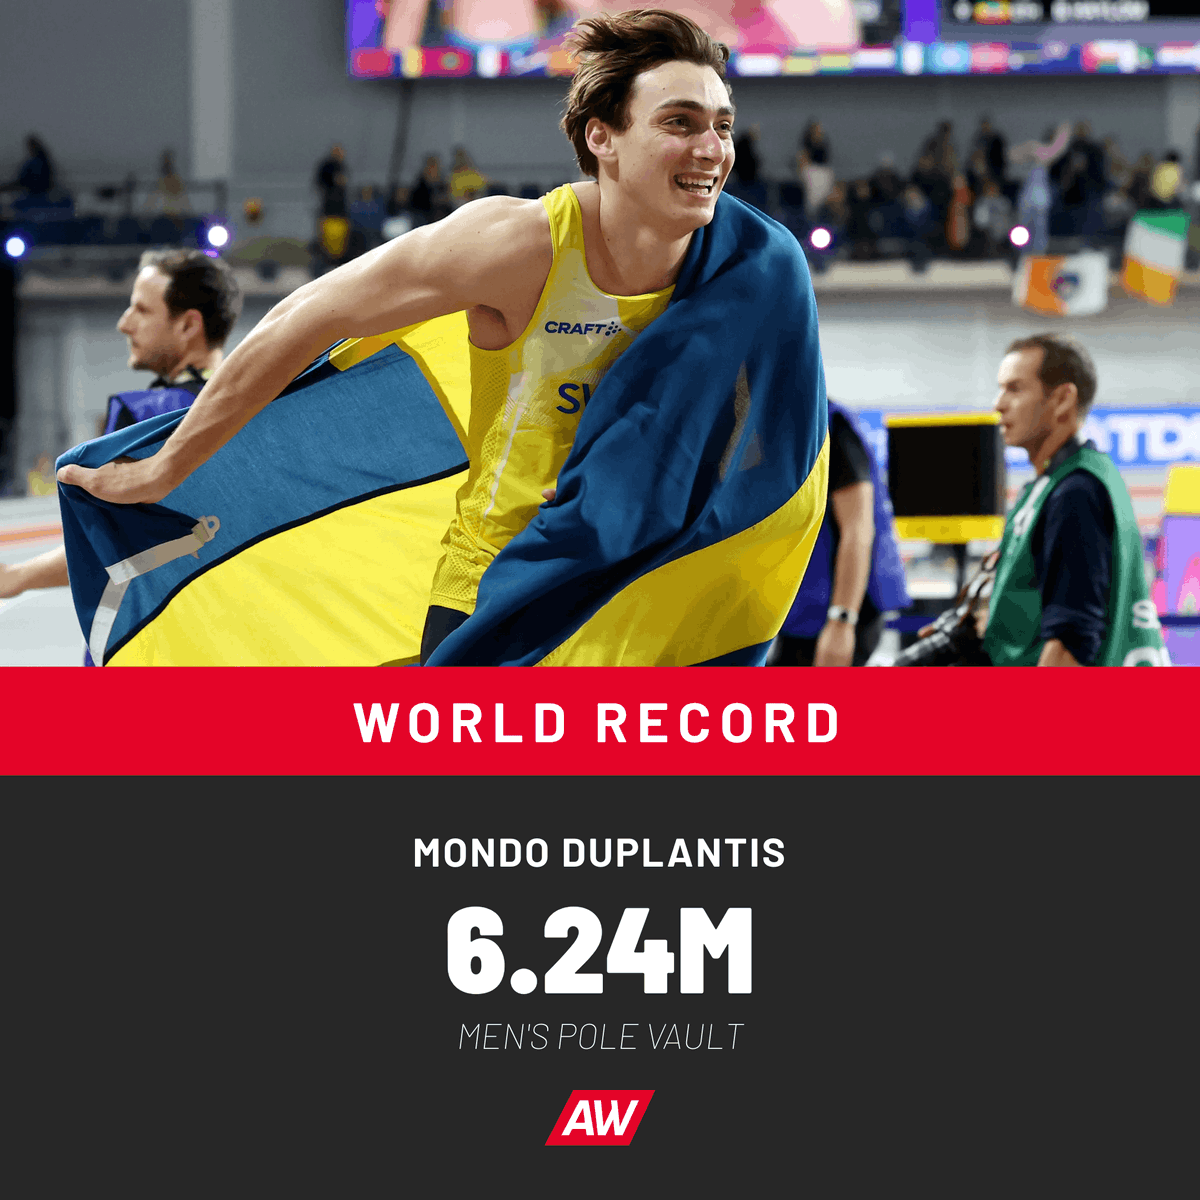 WORLD RECORD Mondo Duplantis does it yet again 🔥 In his opening outdoor meeting of the 2024 season, the Swedish pole vaulting superstar has just broken his world record with 6.24m at the Xiamen Diamond League 🤯 Reaching for the stars 💫